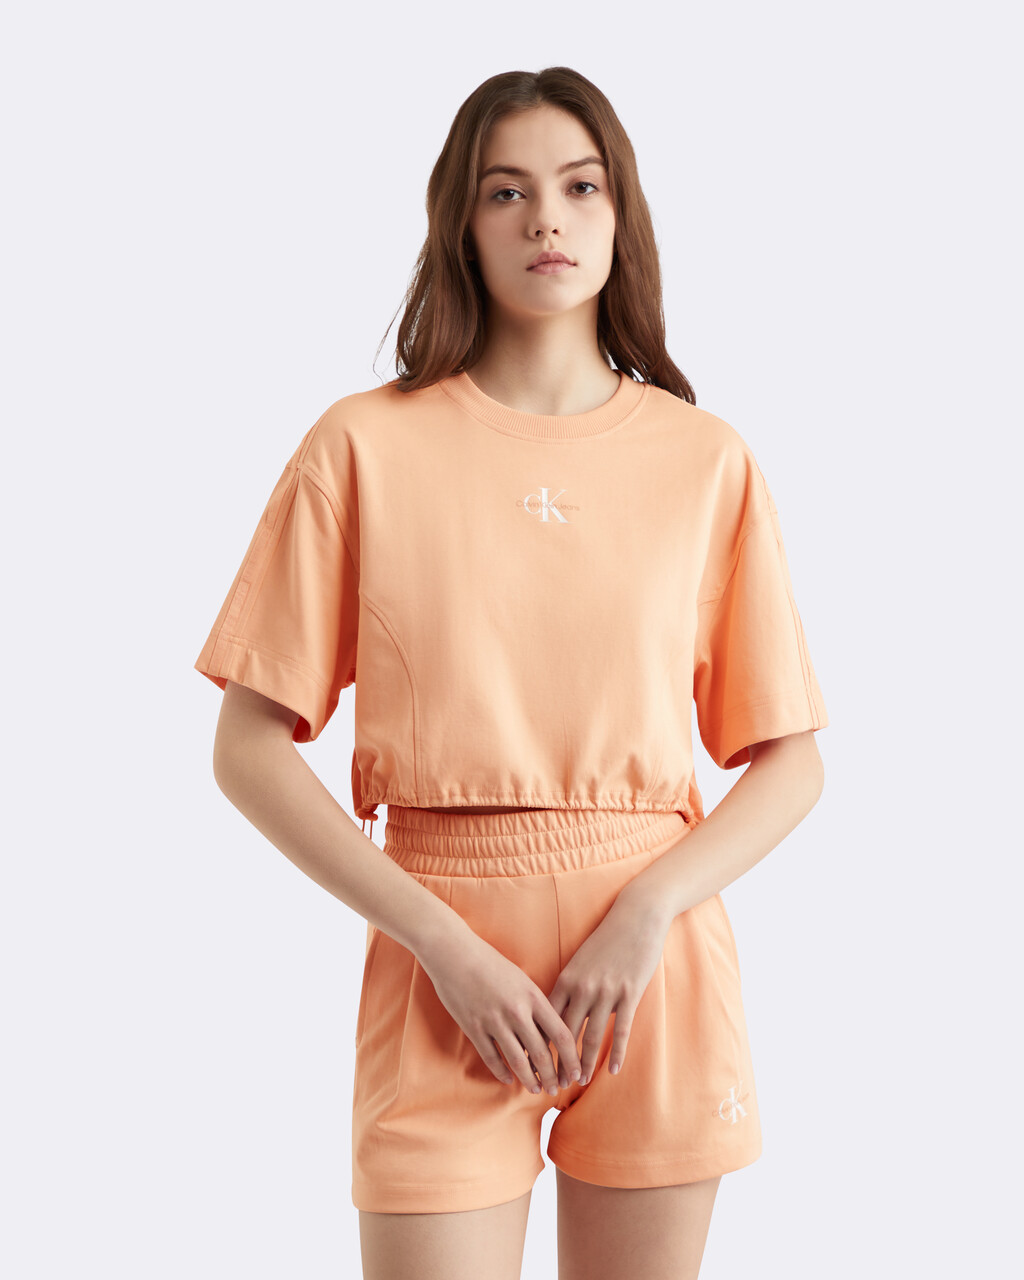 Oversized Cropped Cooling Sweatshirt, PEACH DREAM, hi-res